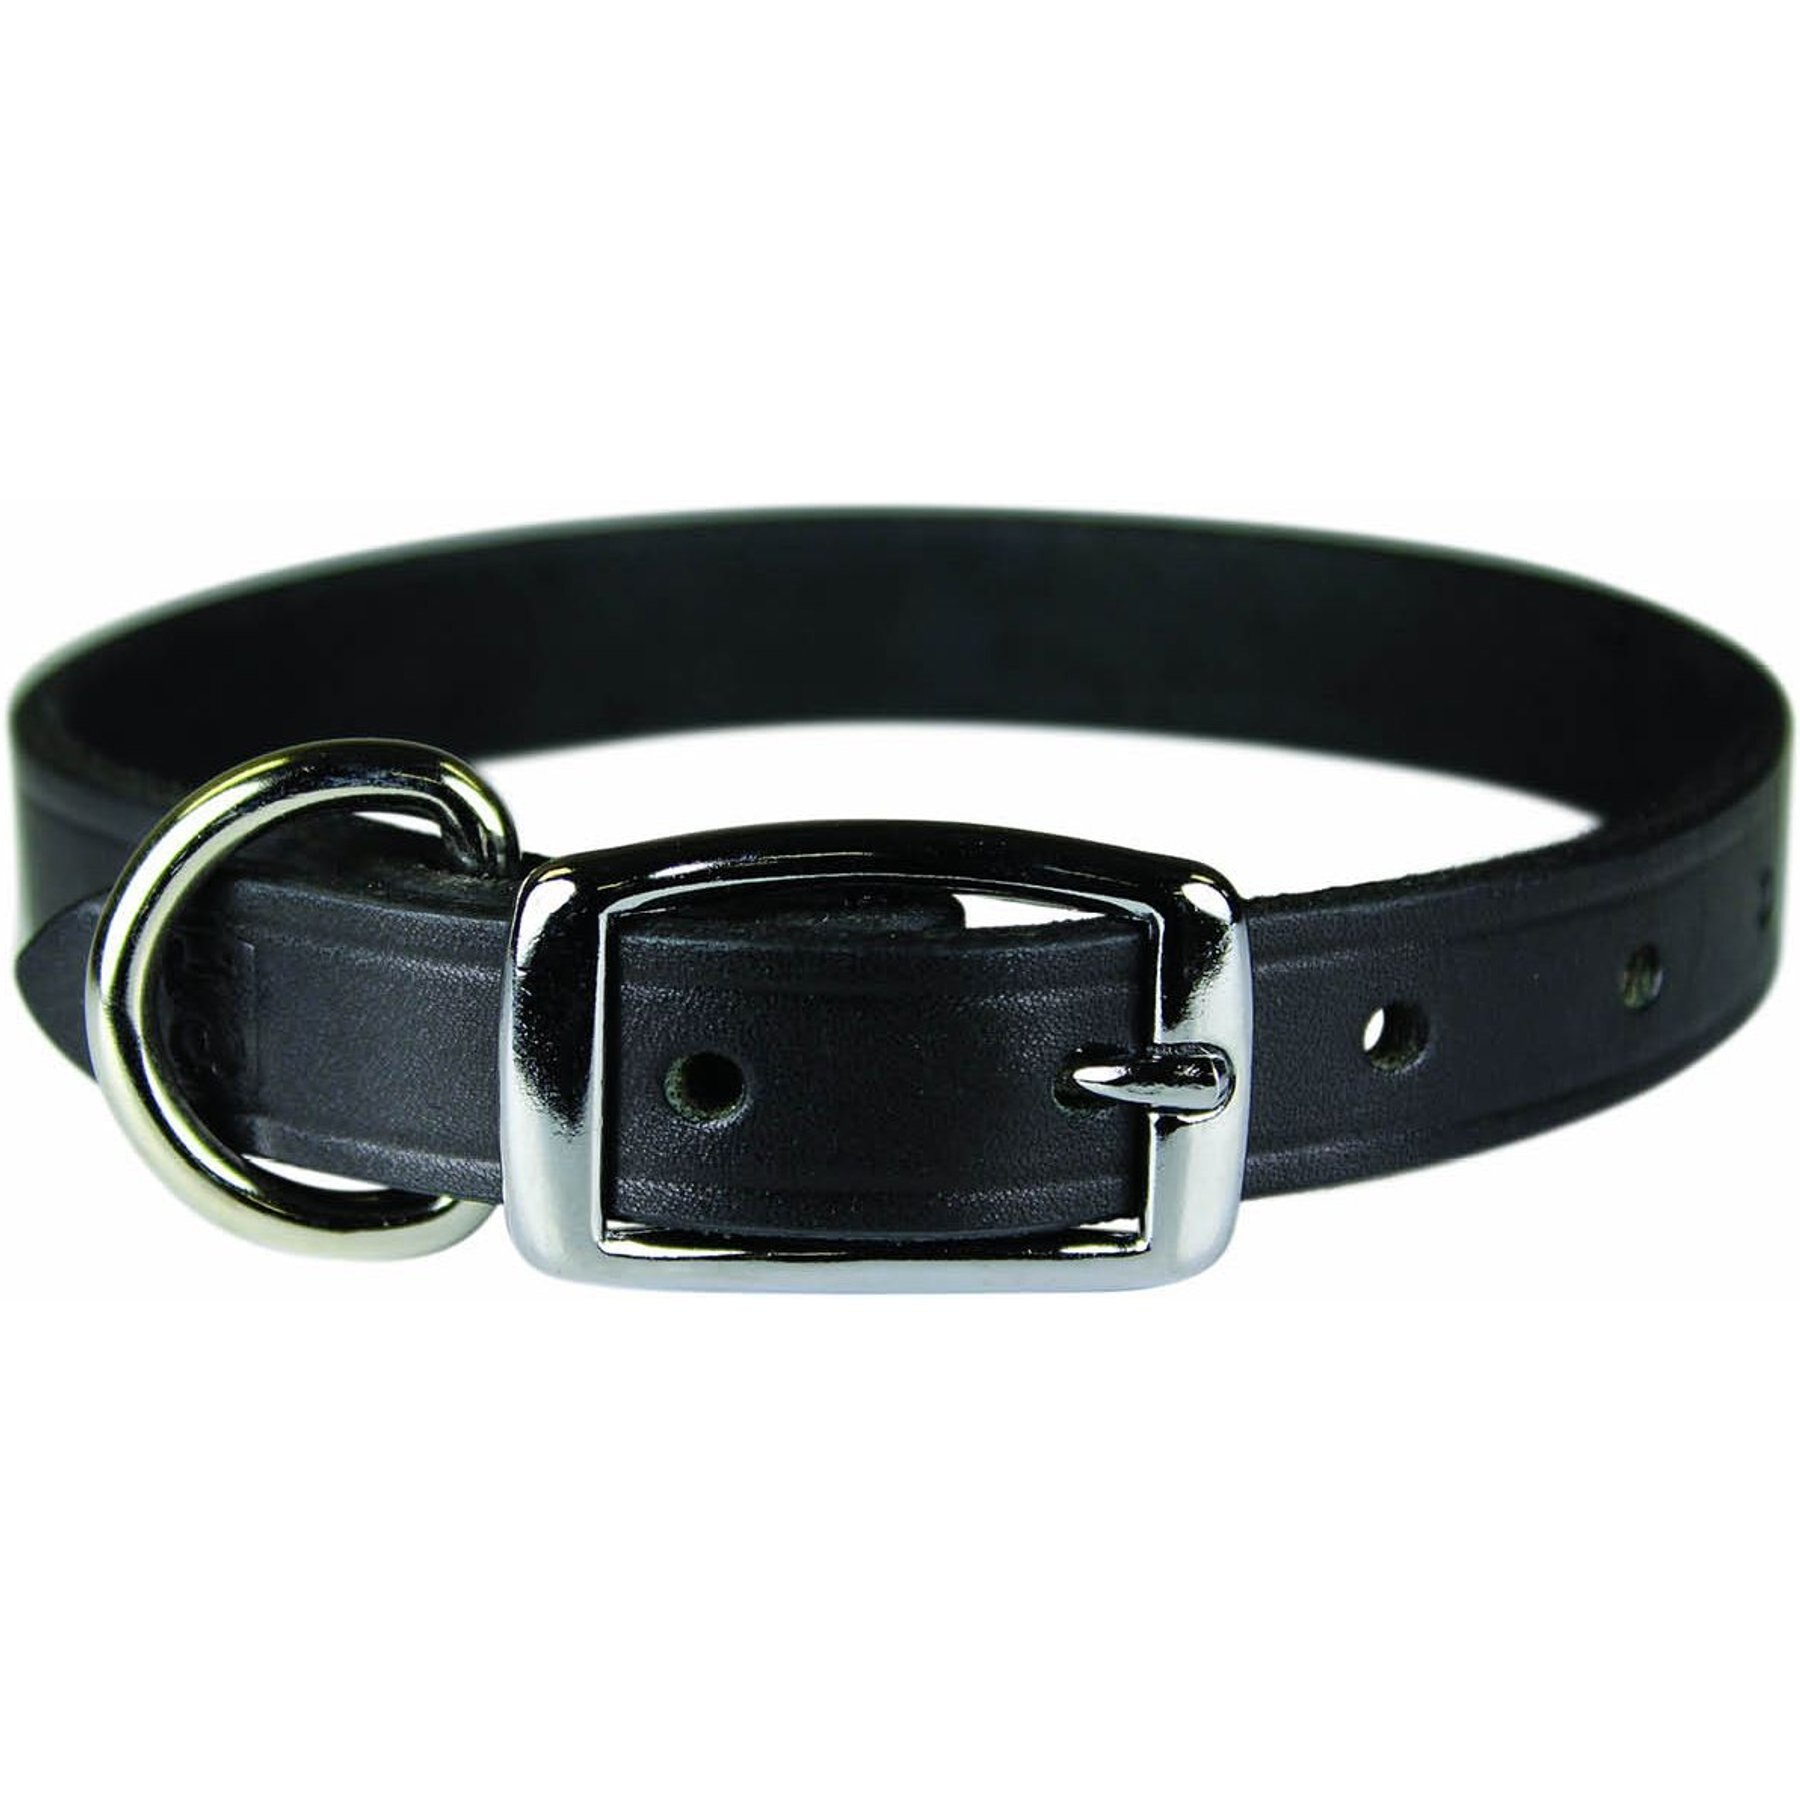 FRIENDSHIPCOLLAR Puppy Love Leather Dog Collar with Friendship Bracelet,  Large: 17 to 20-in neck, 1-in wide 